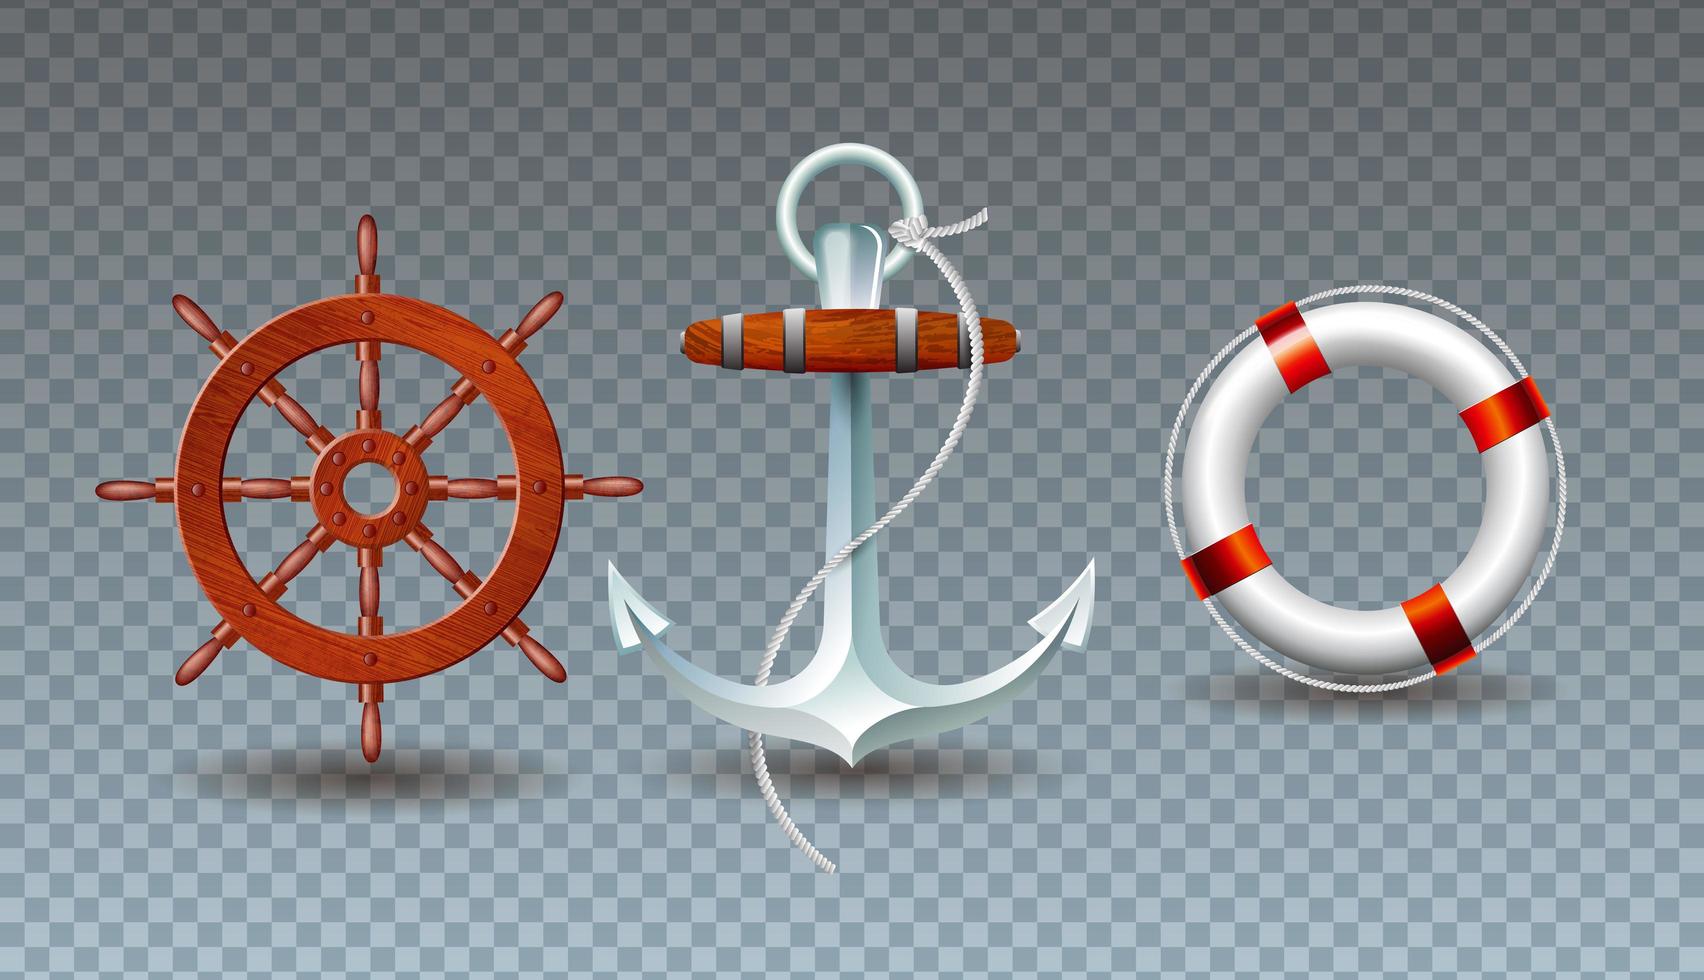 Vector Illustration with Steering Wheel, Anchor and Lifebelt Collection Isolated on Transparent Background. Vector Holiday Design with Sea Sipping Elements Set